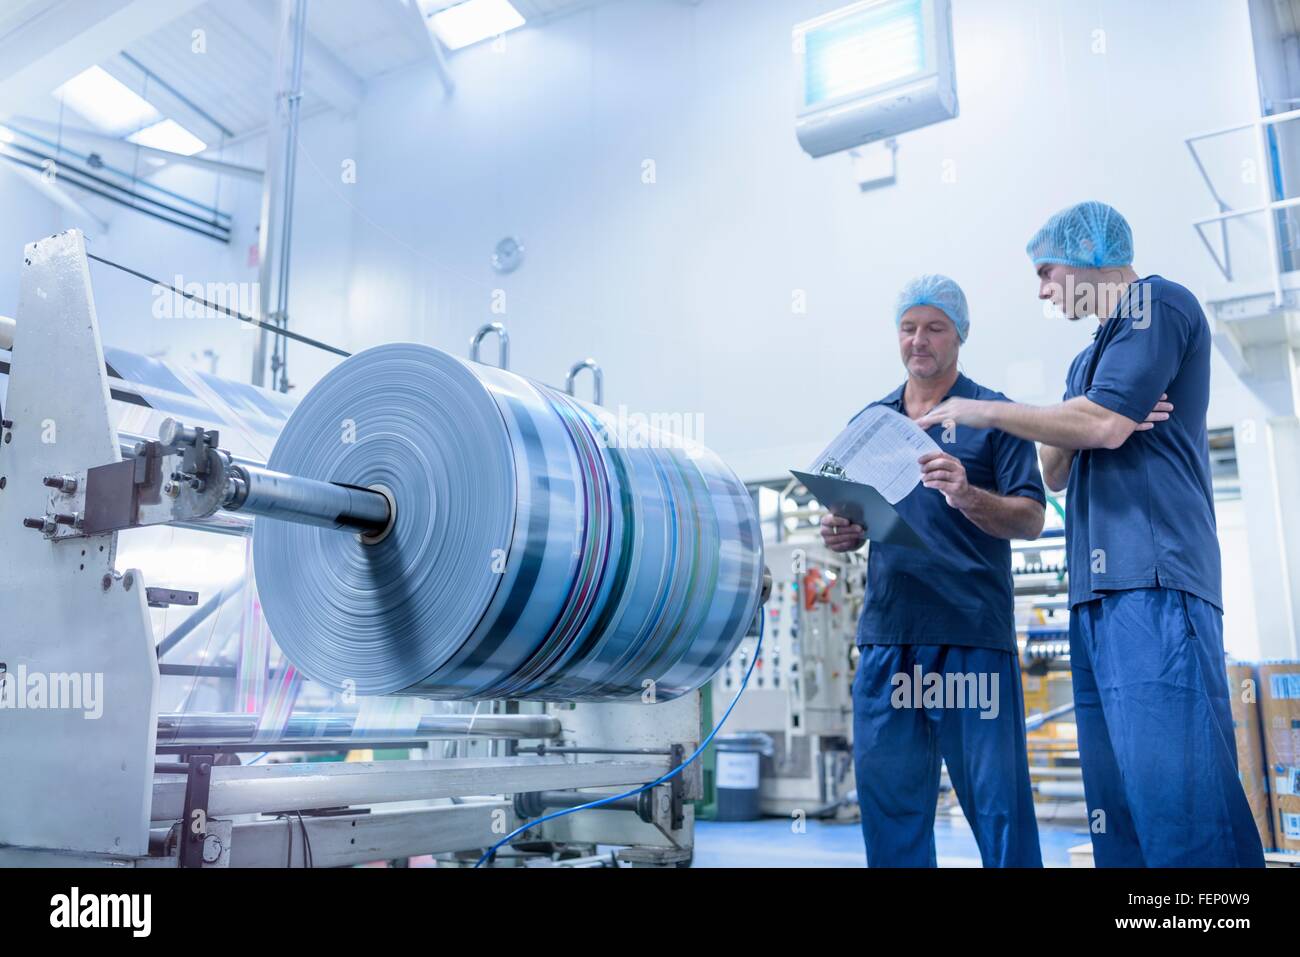 Workers in discussion in food packaging printing factory Stock Photo